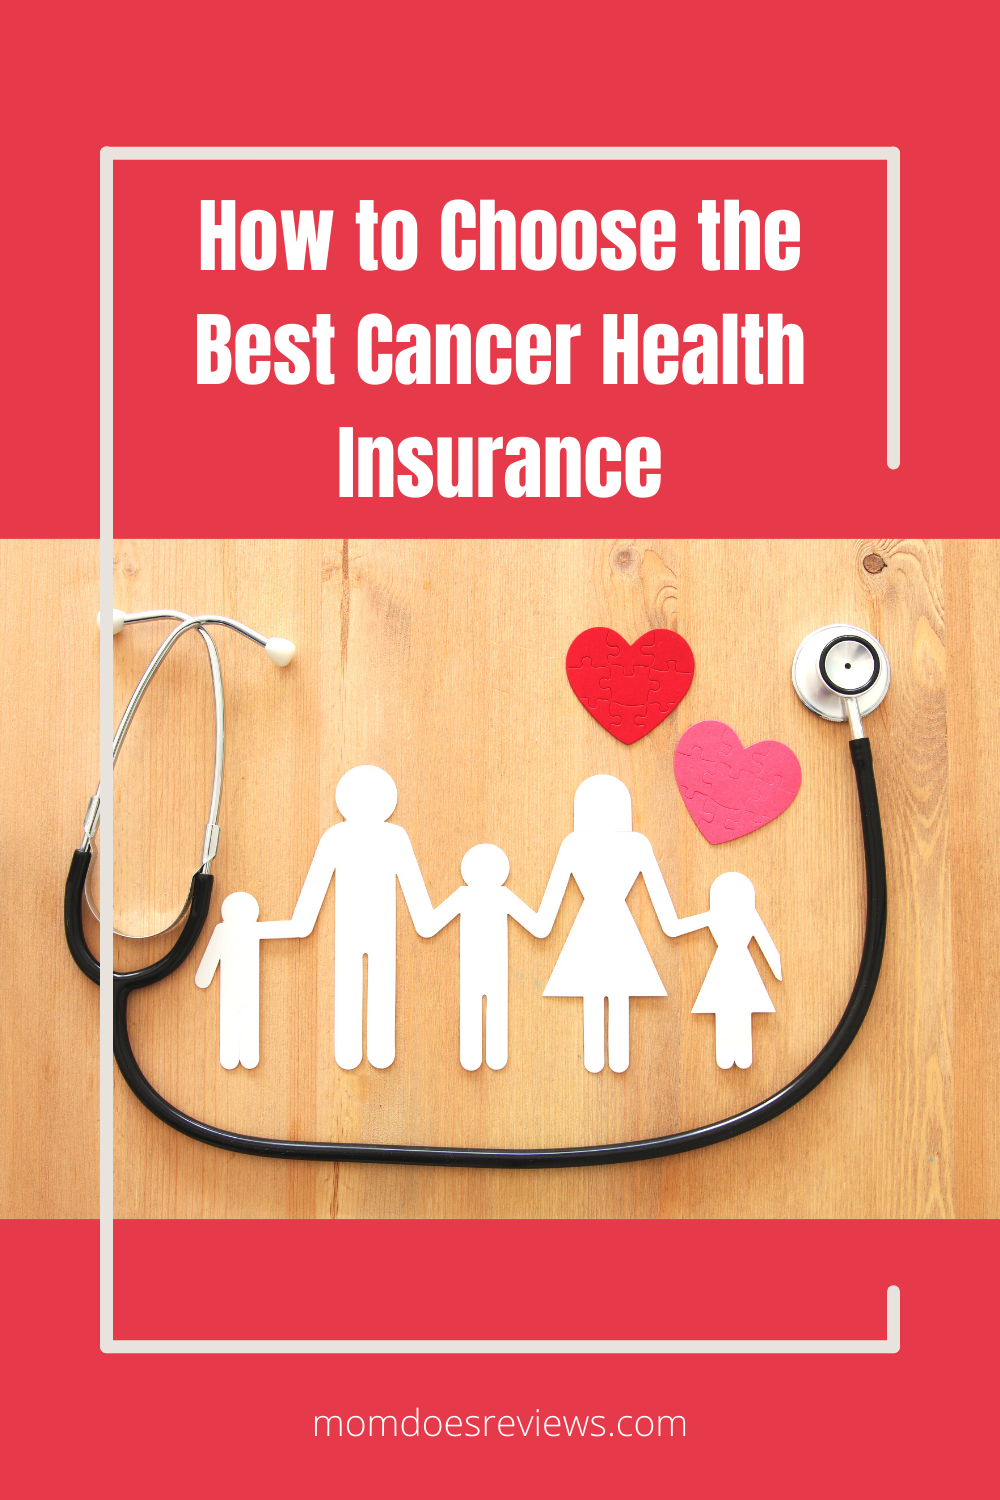 8 Tips to Choose the Best Cancer Health Insurance Plan